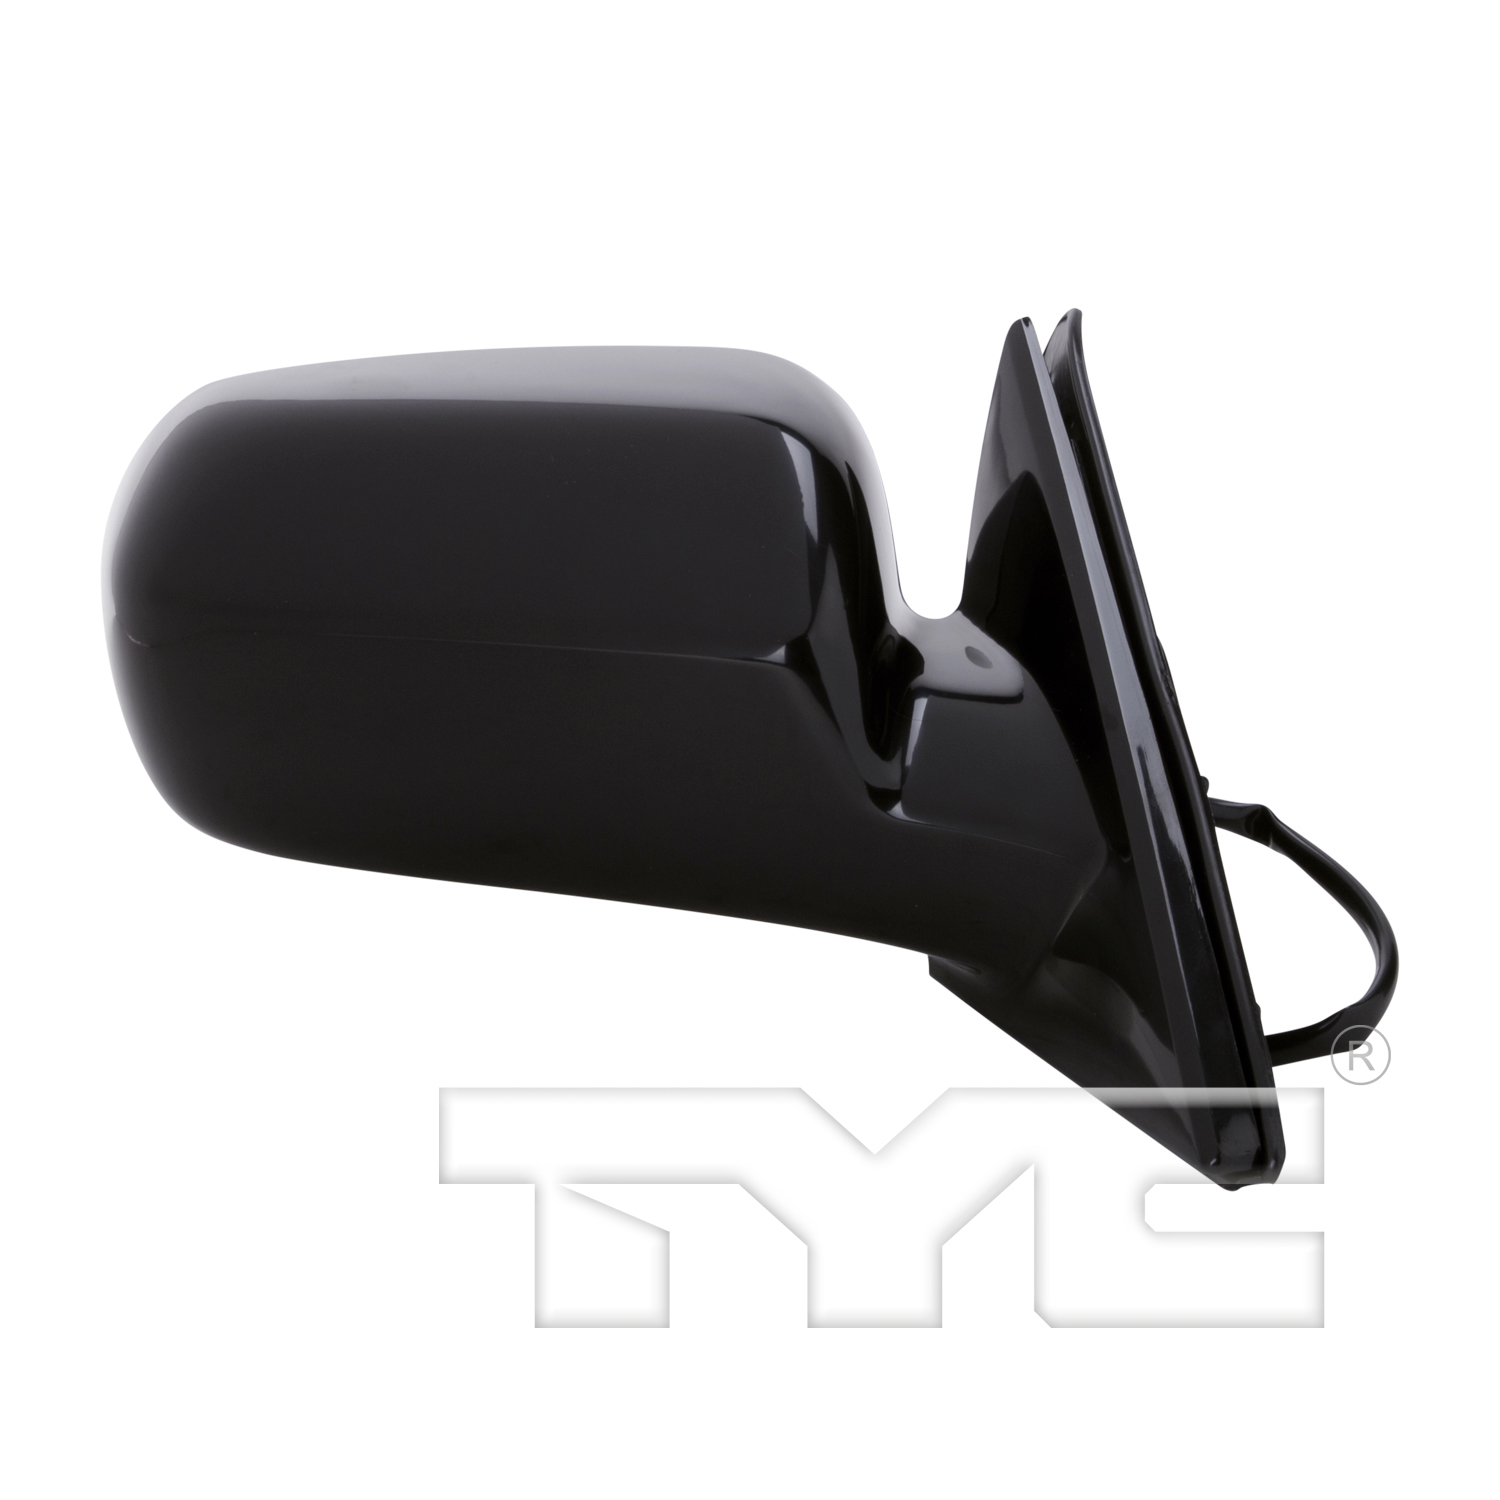 Aftermarket MIRRORS for HONDA - ACCORD, ACCORD,98-98,RT Mirror outside rear view